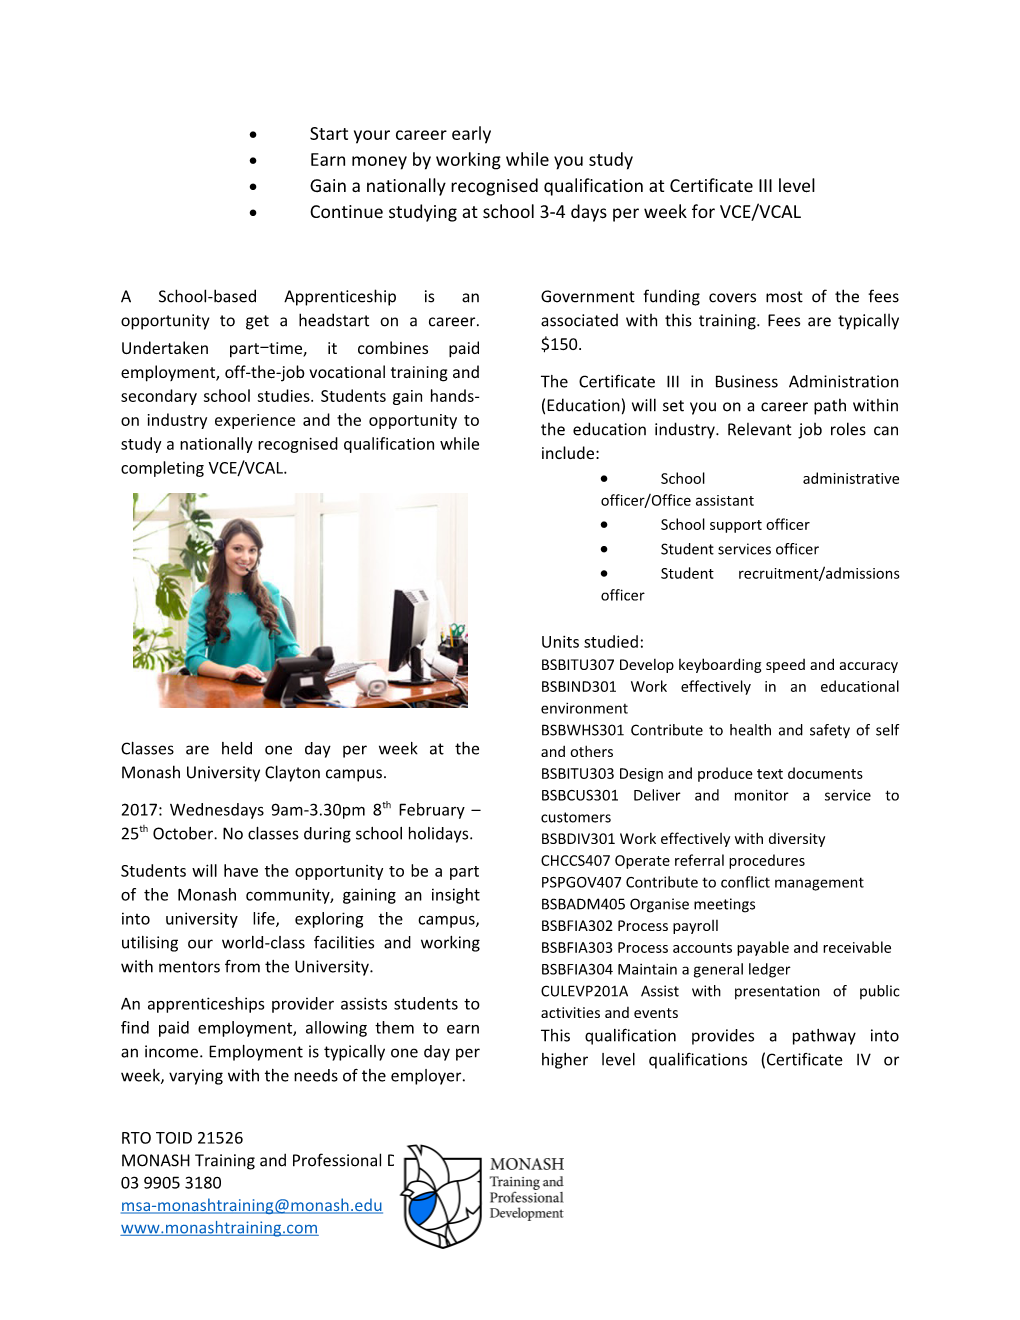 SCHOOL-BASED APPRENTICESHIPS at MONASH CERTIFICATE III in BUSINESS ADMINISTRATION (Education)